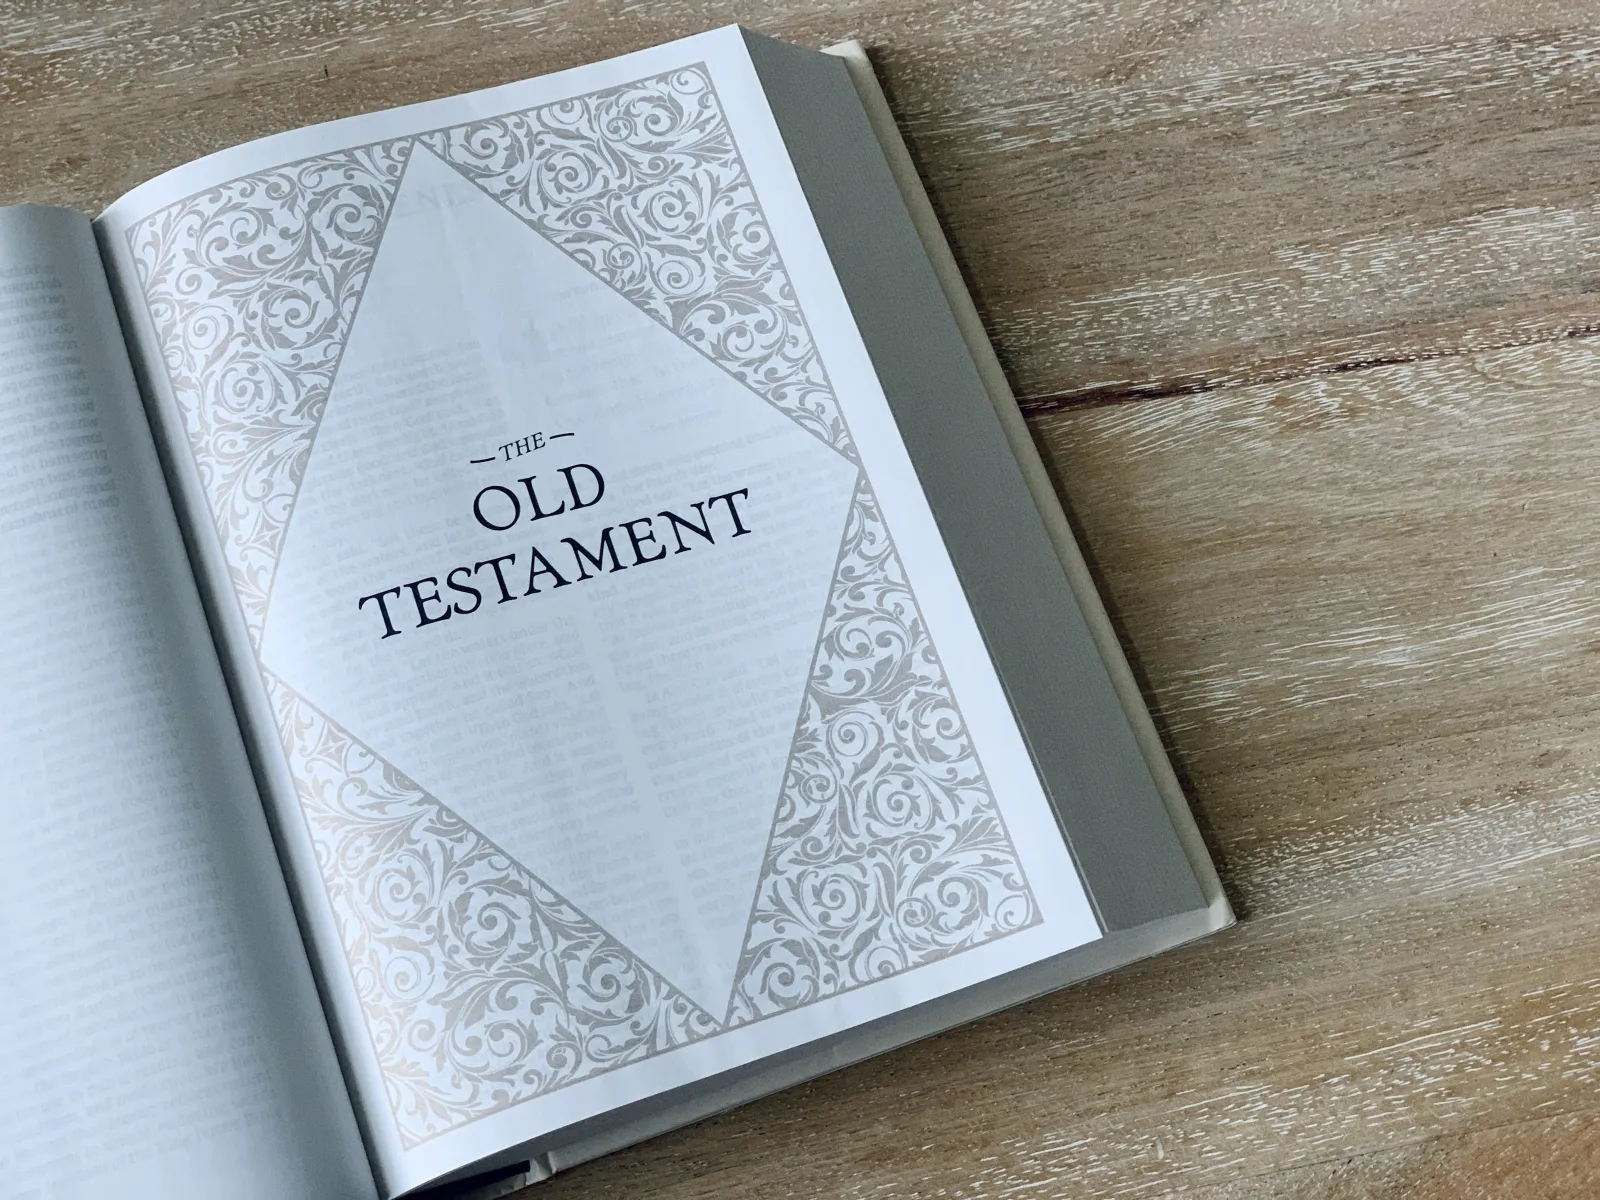 The Old Testament open book